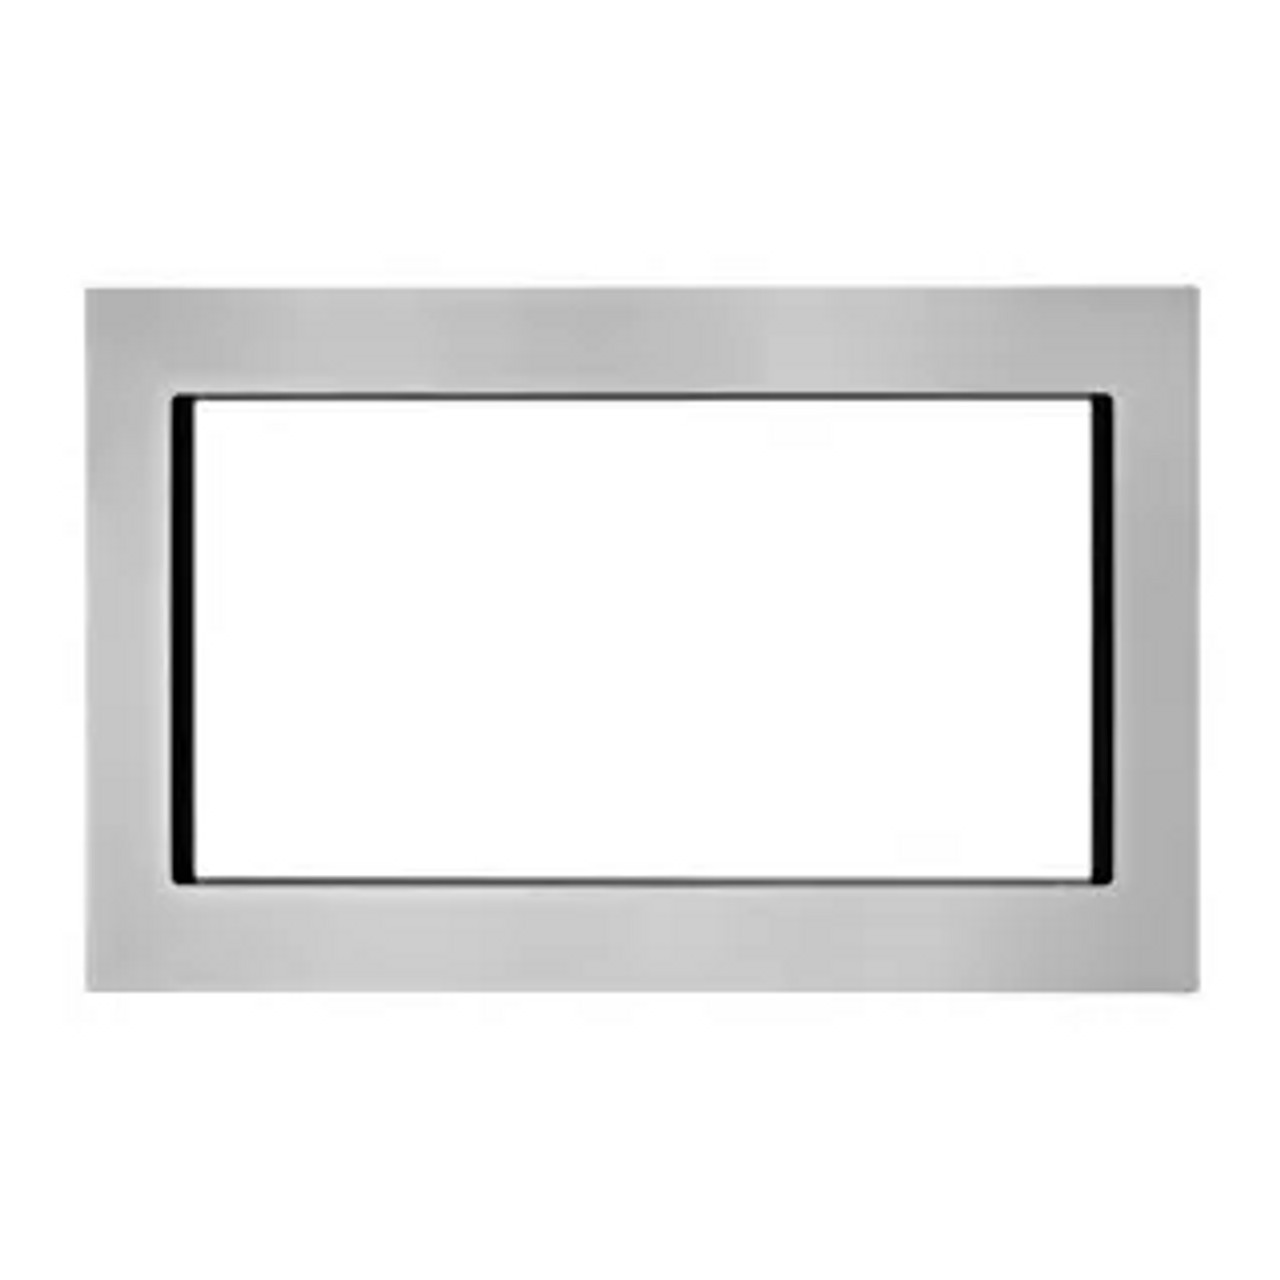 Whirlpool Microwave Stainless Steel Trim Kit MK2220AS |Scratch and Dent|